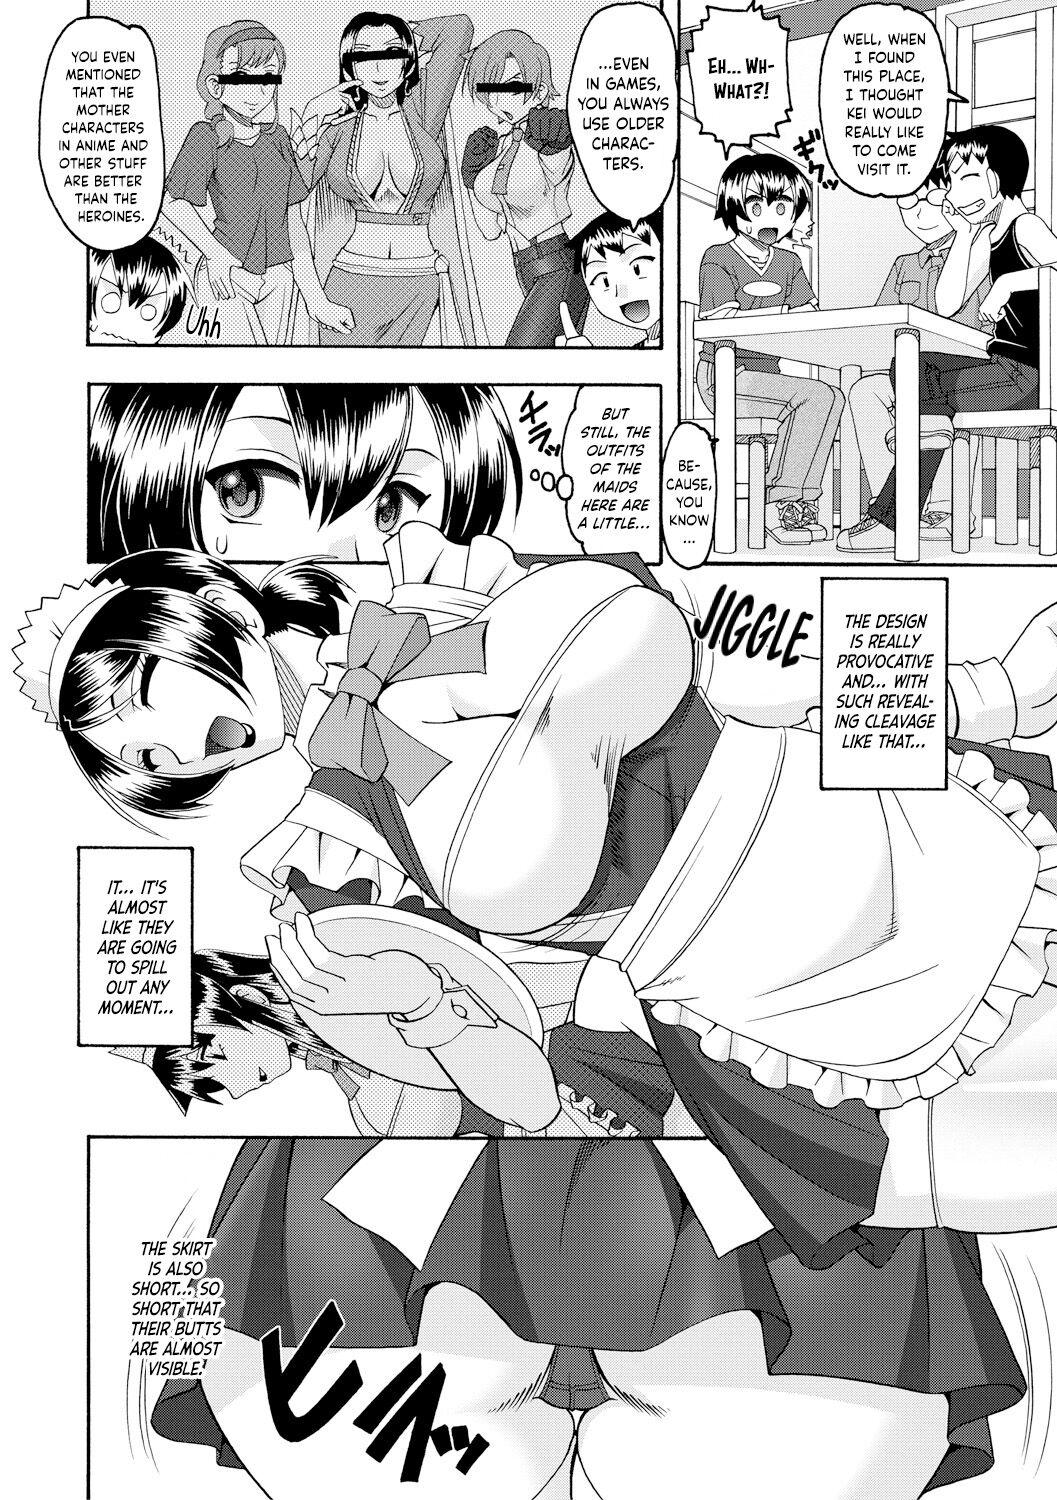 Maid OVER 30 Chapters 1-6 1